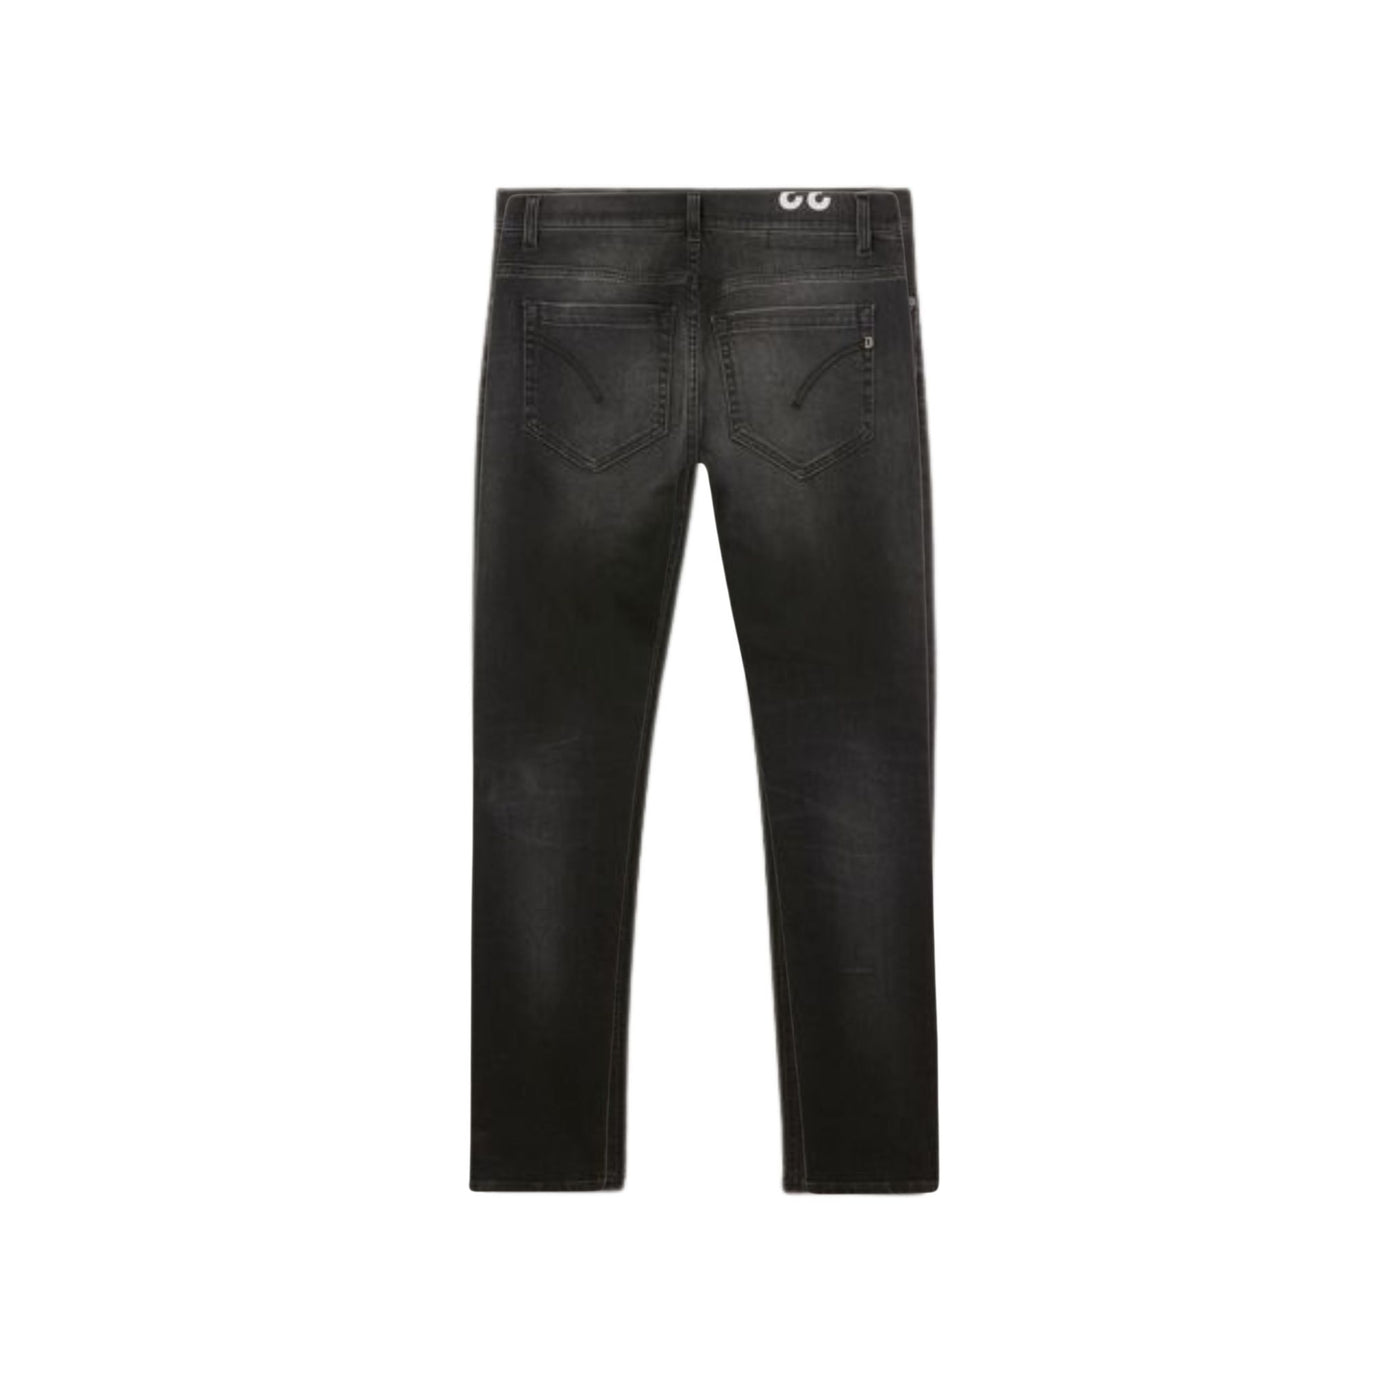 Regular men's jeans with washed out effect